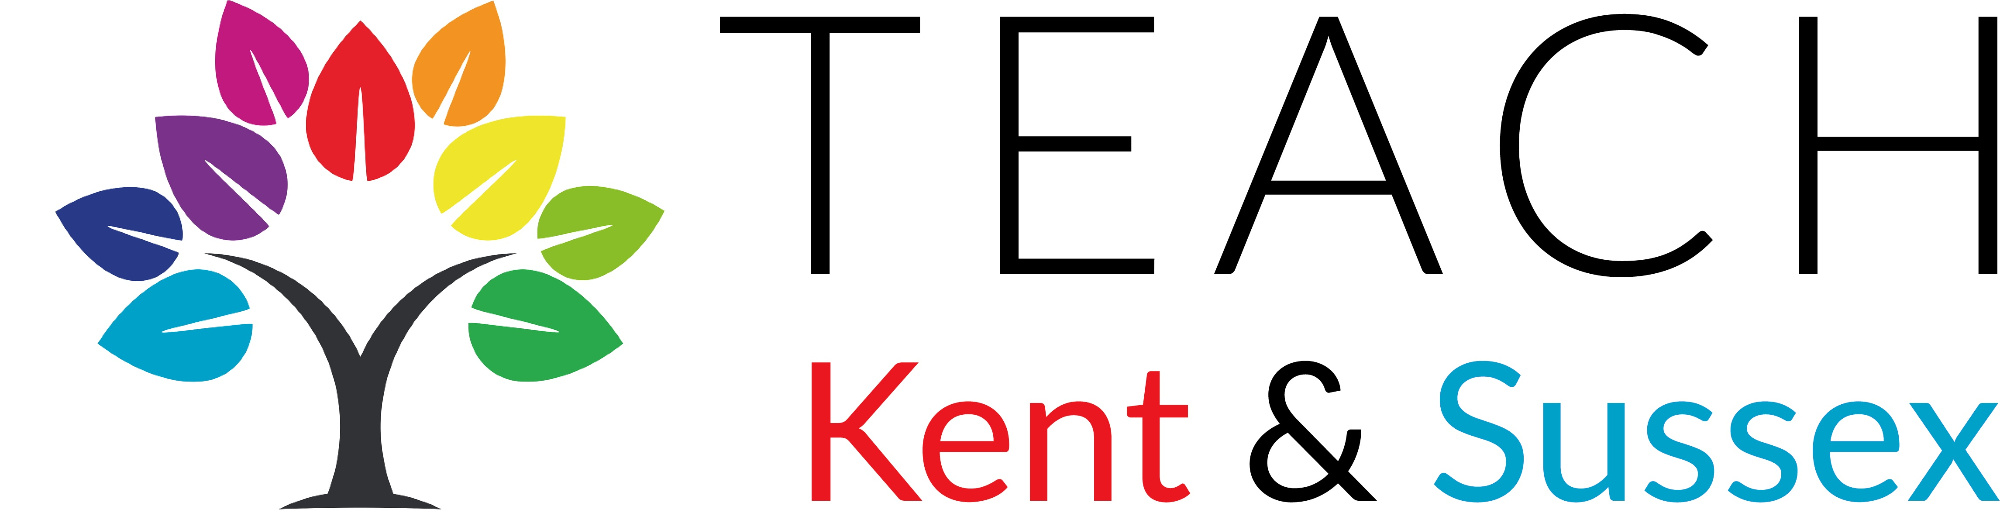 Teach Kent and Sussex